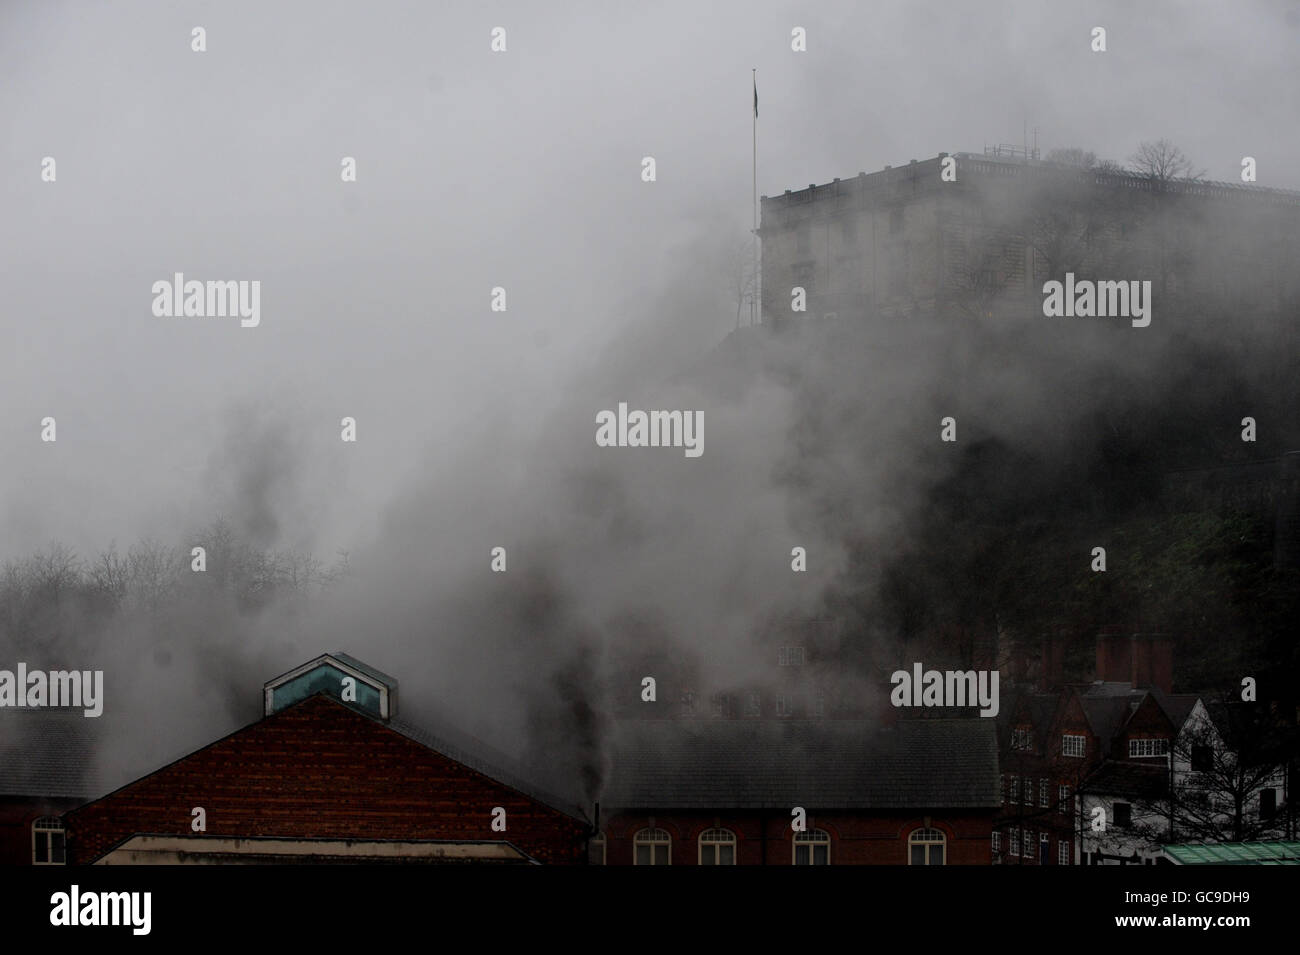 Nottingham Castle is shrouded in smoke from a fire in Nottingham city centre where an electricity substation fire has put over 2000 homes and businesses in Nottingham without electricity. Stock Photo